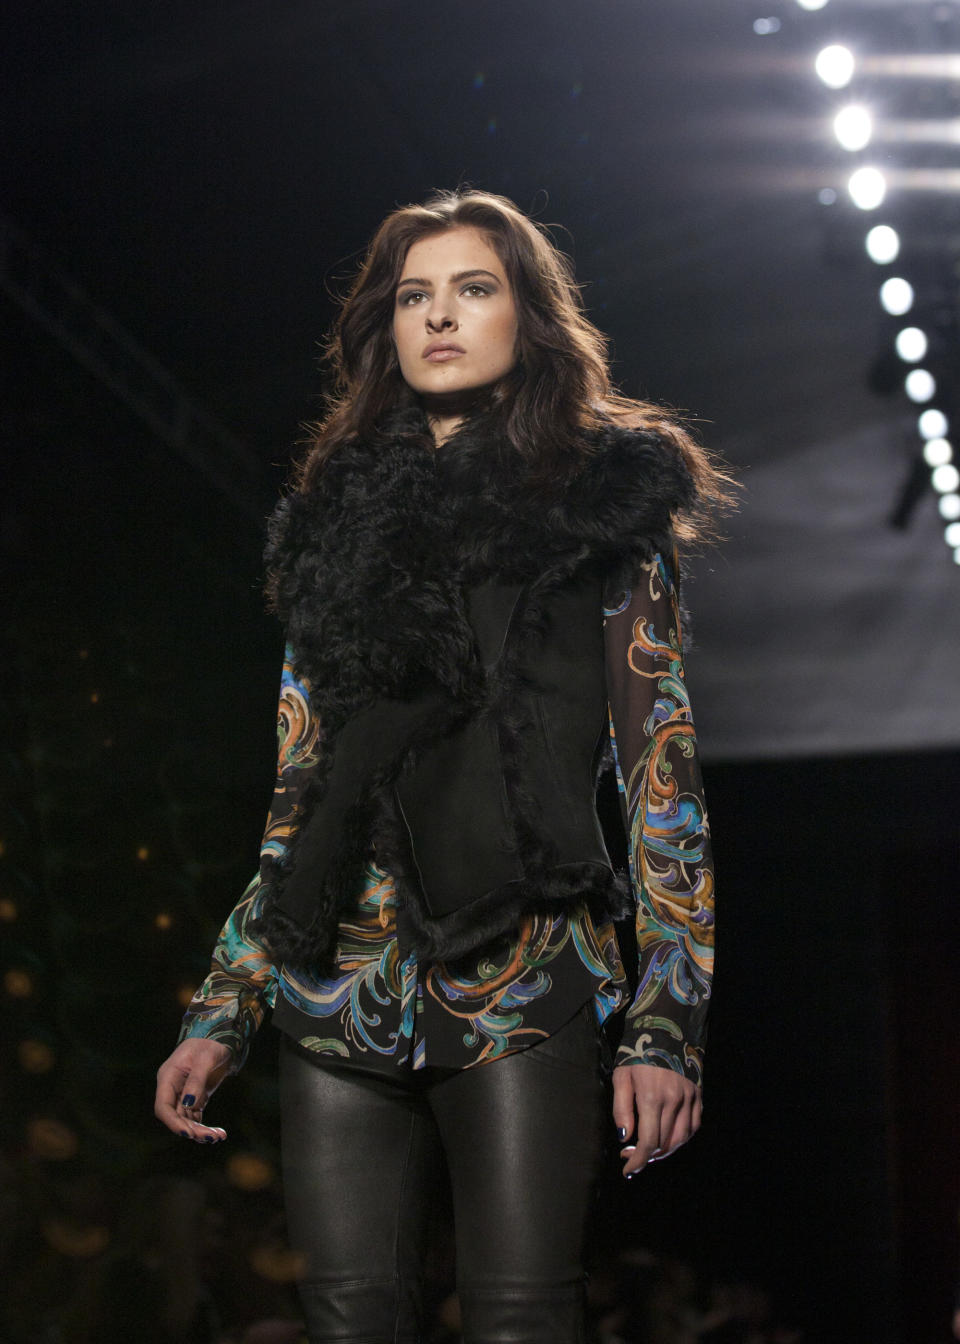 A model walks the runway during the Nicole Miller Fall 2013 fashion show during Fashion Week, Friday, Feb. 8, 2013, in New York. (AP Photo/Karly Domb Sadof)